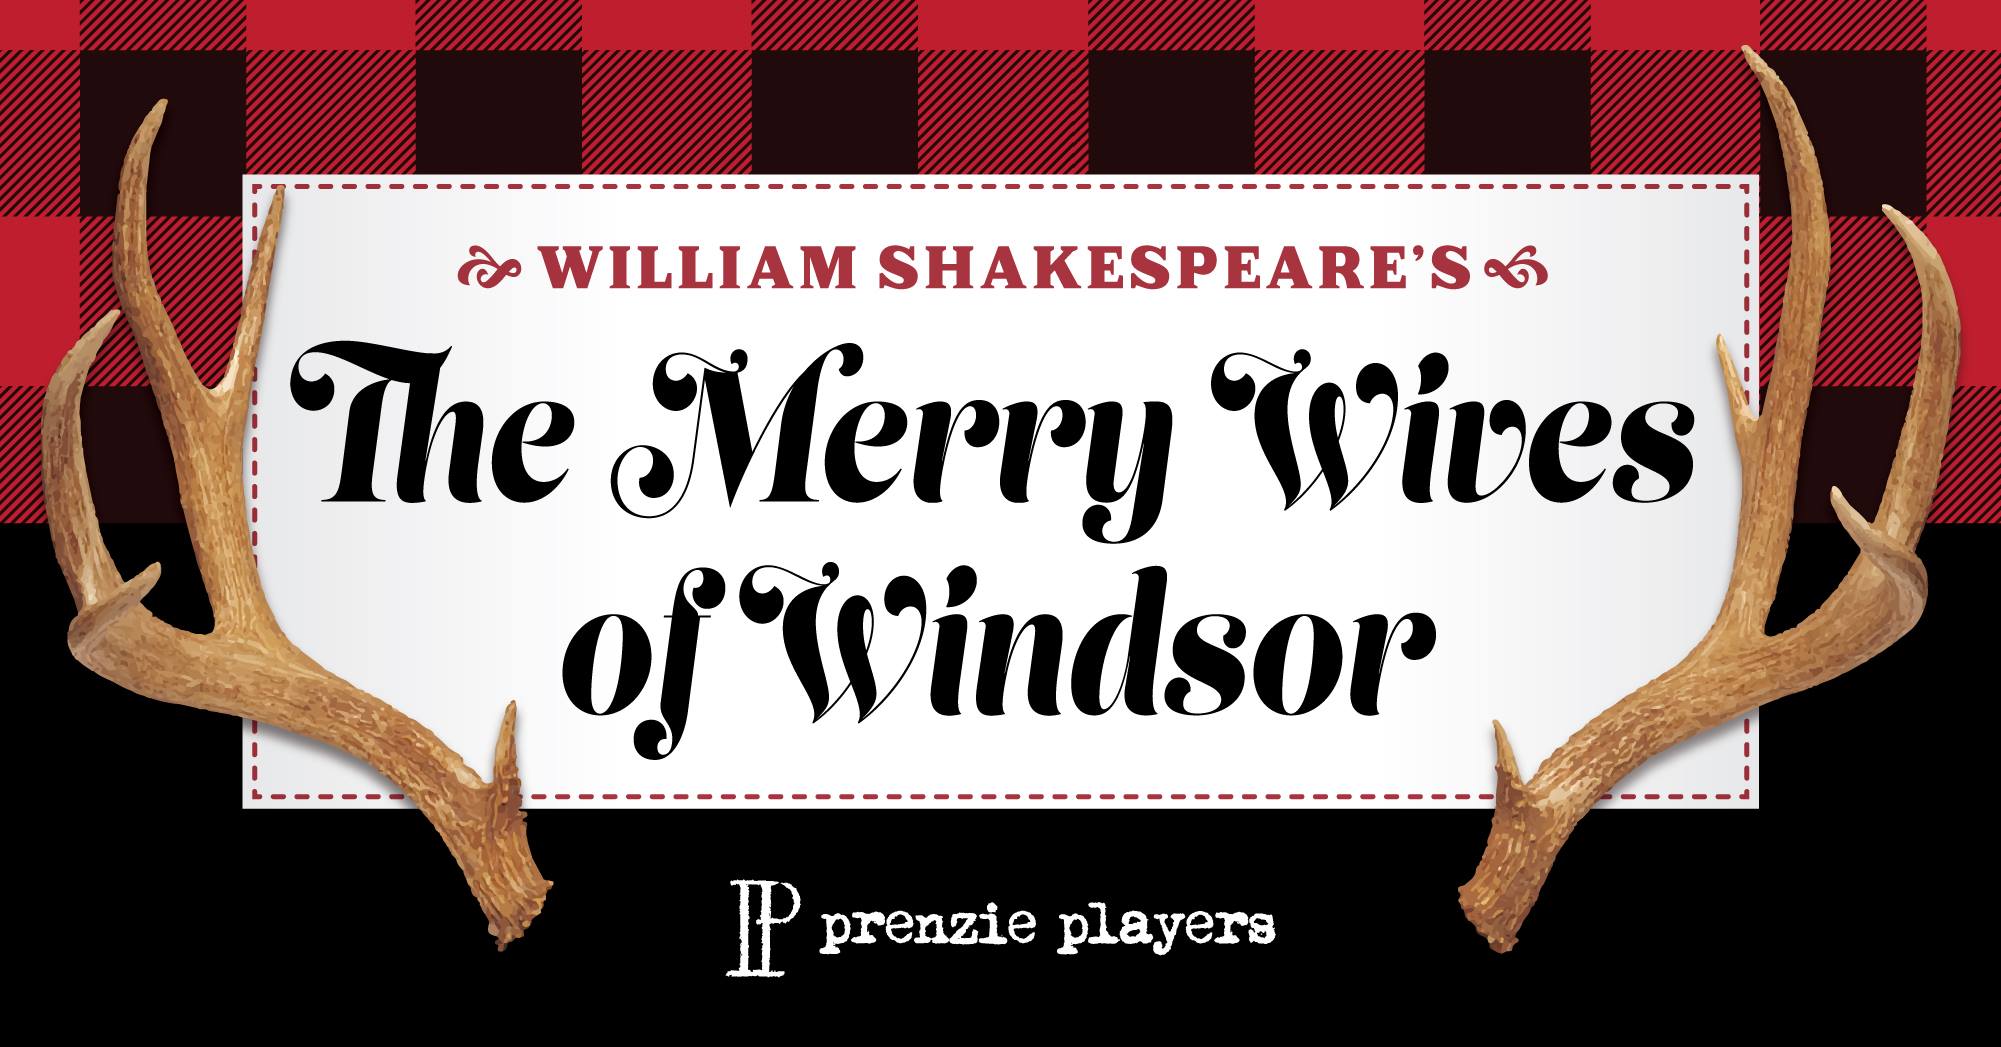 The Prenzie Players' "The Merry Wives of Windsor" at the QC Theatre Workshop -- November 15 through 23.